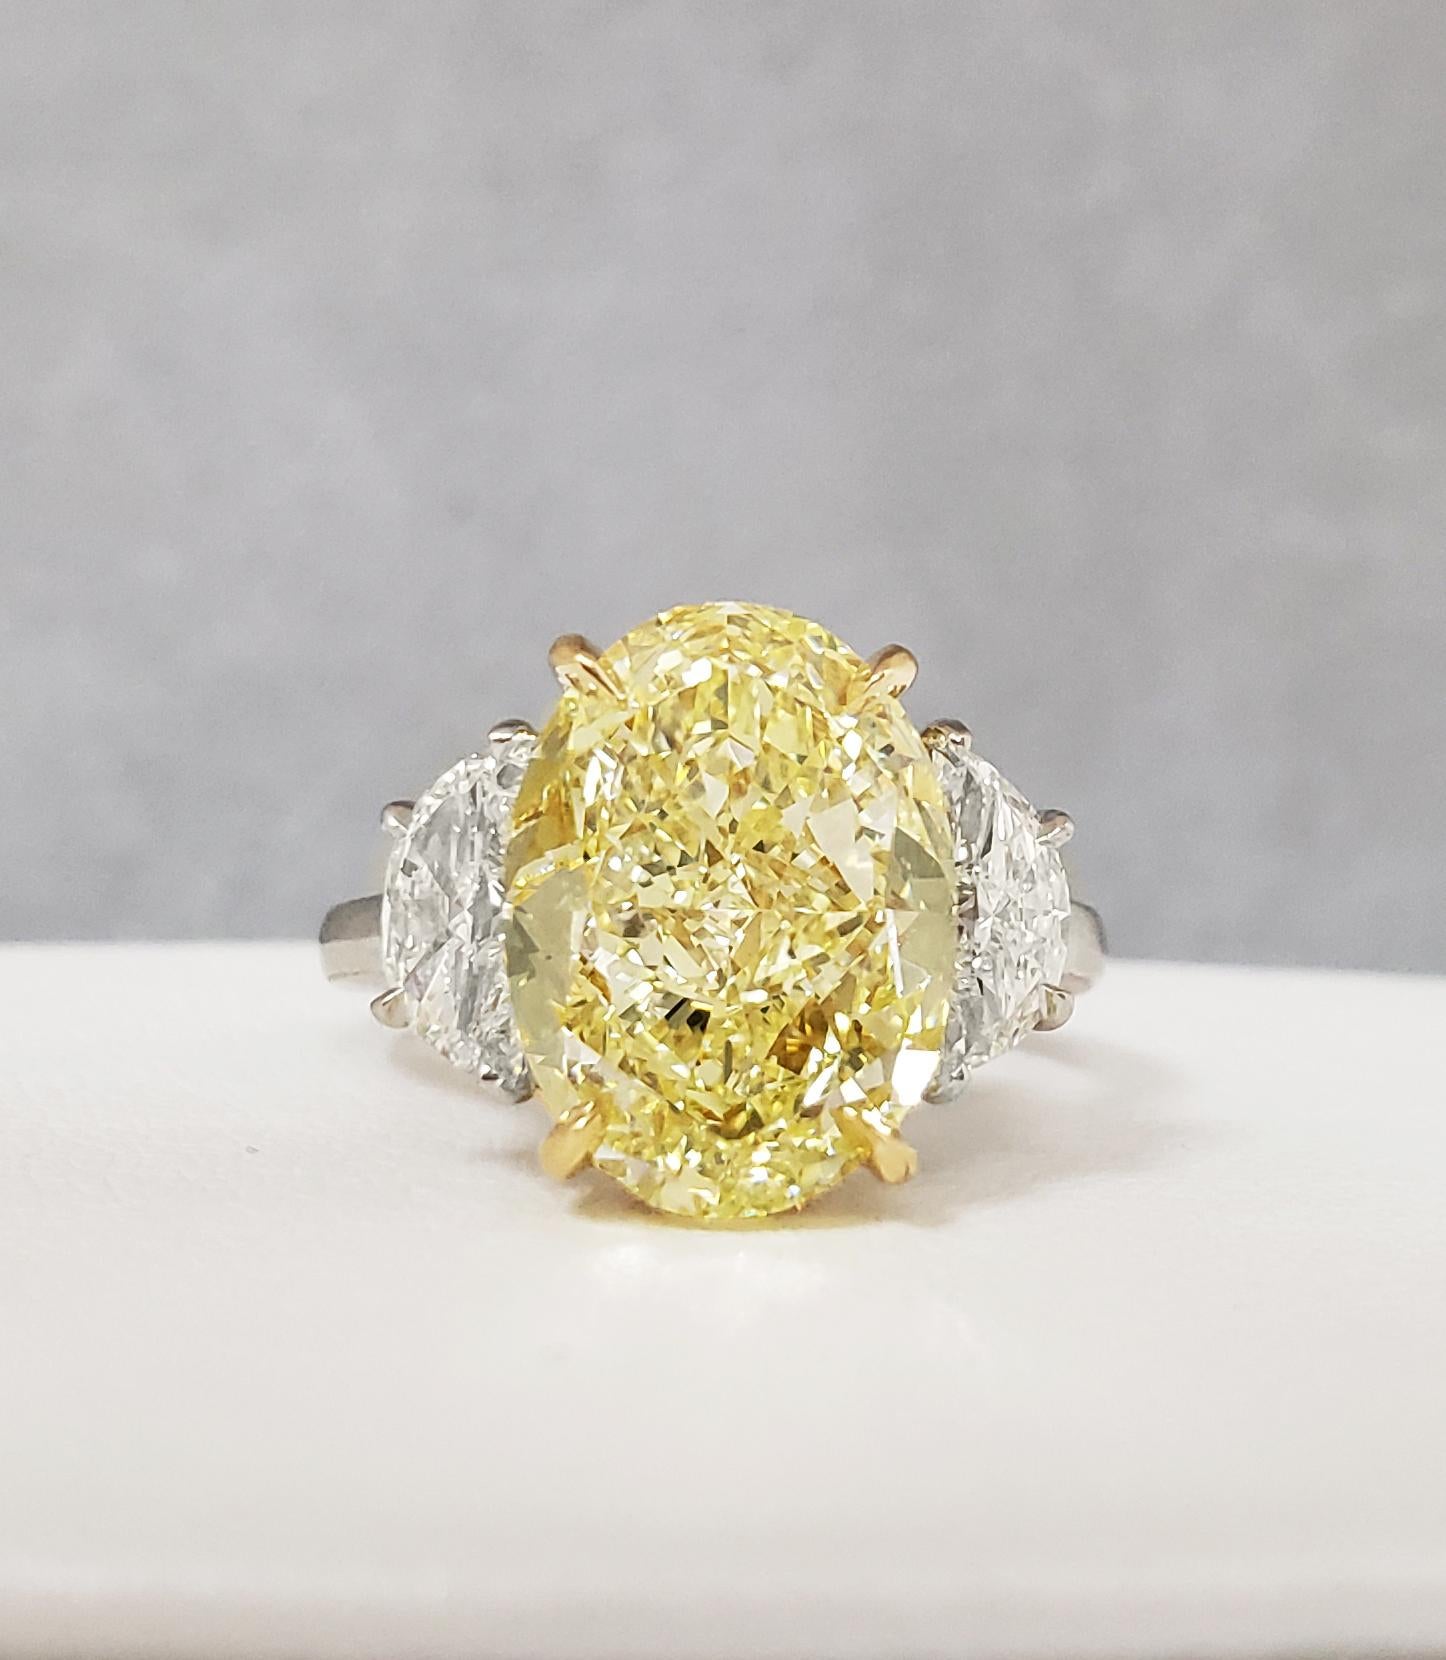 Scarselli's Classic Ring features a 6+ carat Fancy Yellow Oval Diamond with GIA certificate (see certificate picture for details of the stone). The center diamond is accompanied by two white half-moon cut diamonds, H color VS1 clarity 1.13 total